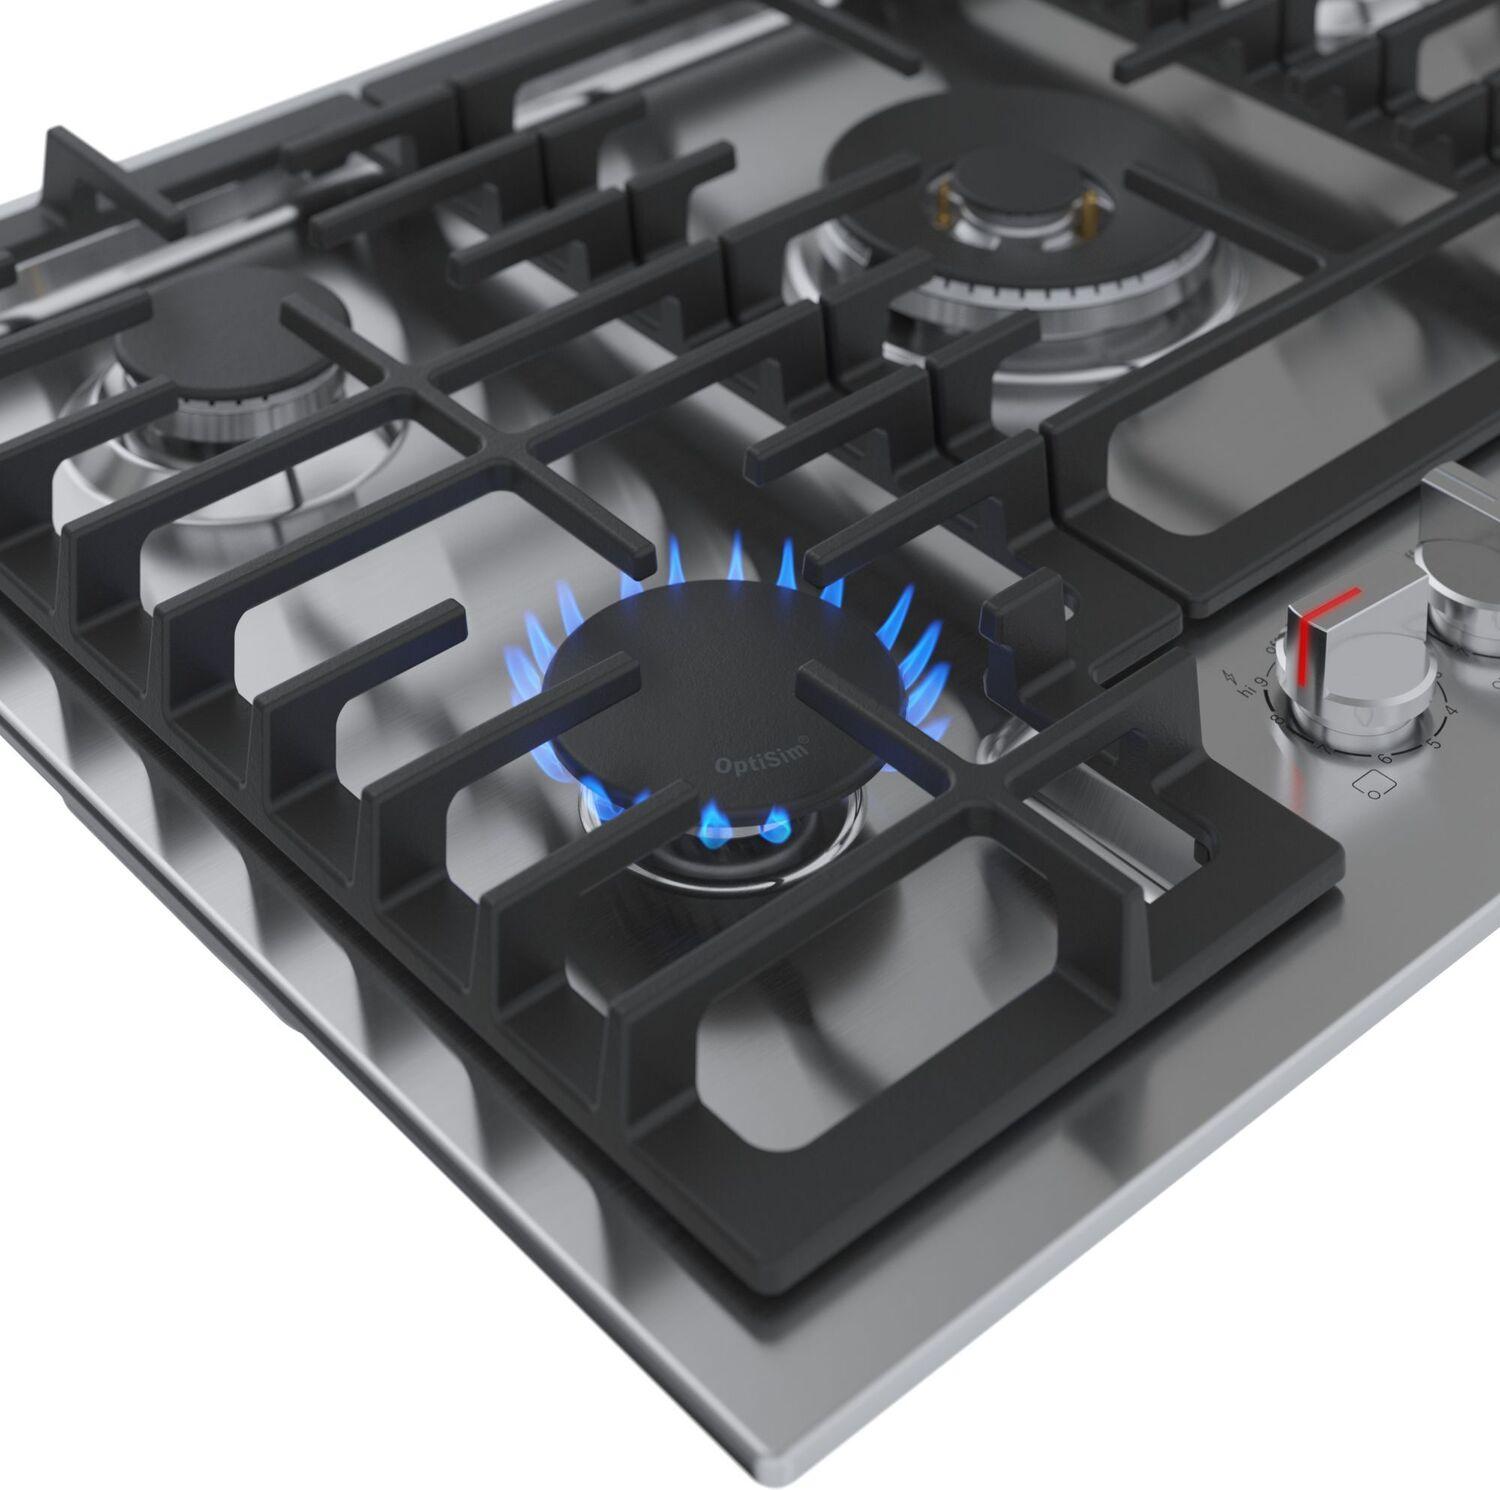 Bosch 800 Series Gas Cooktop 30" Stainless steel NGM8058UC